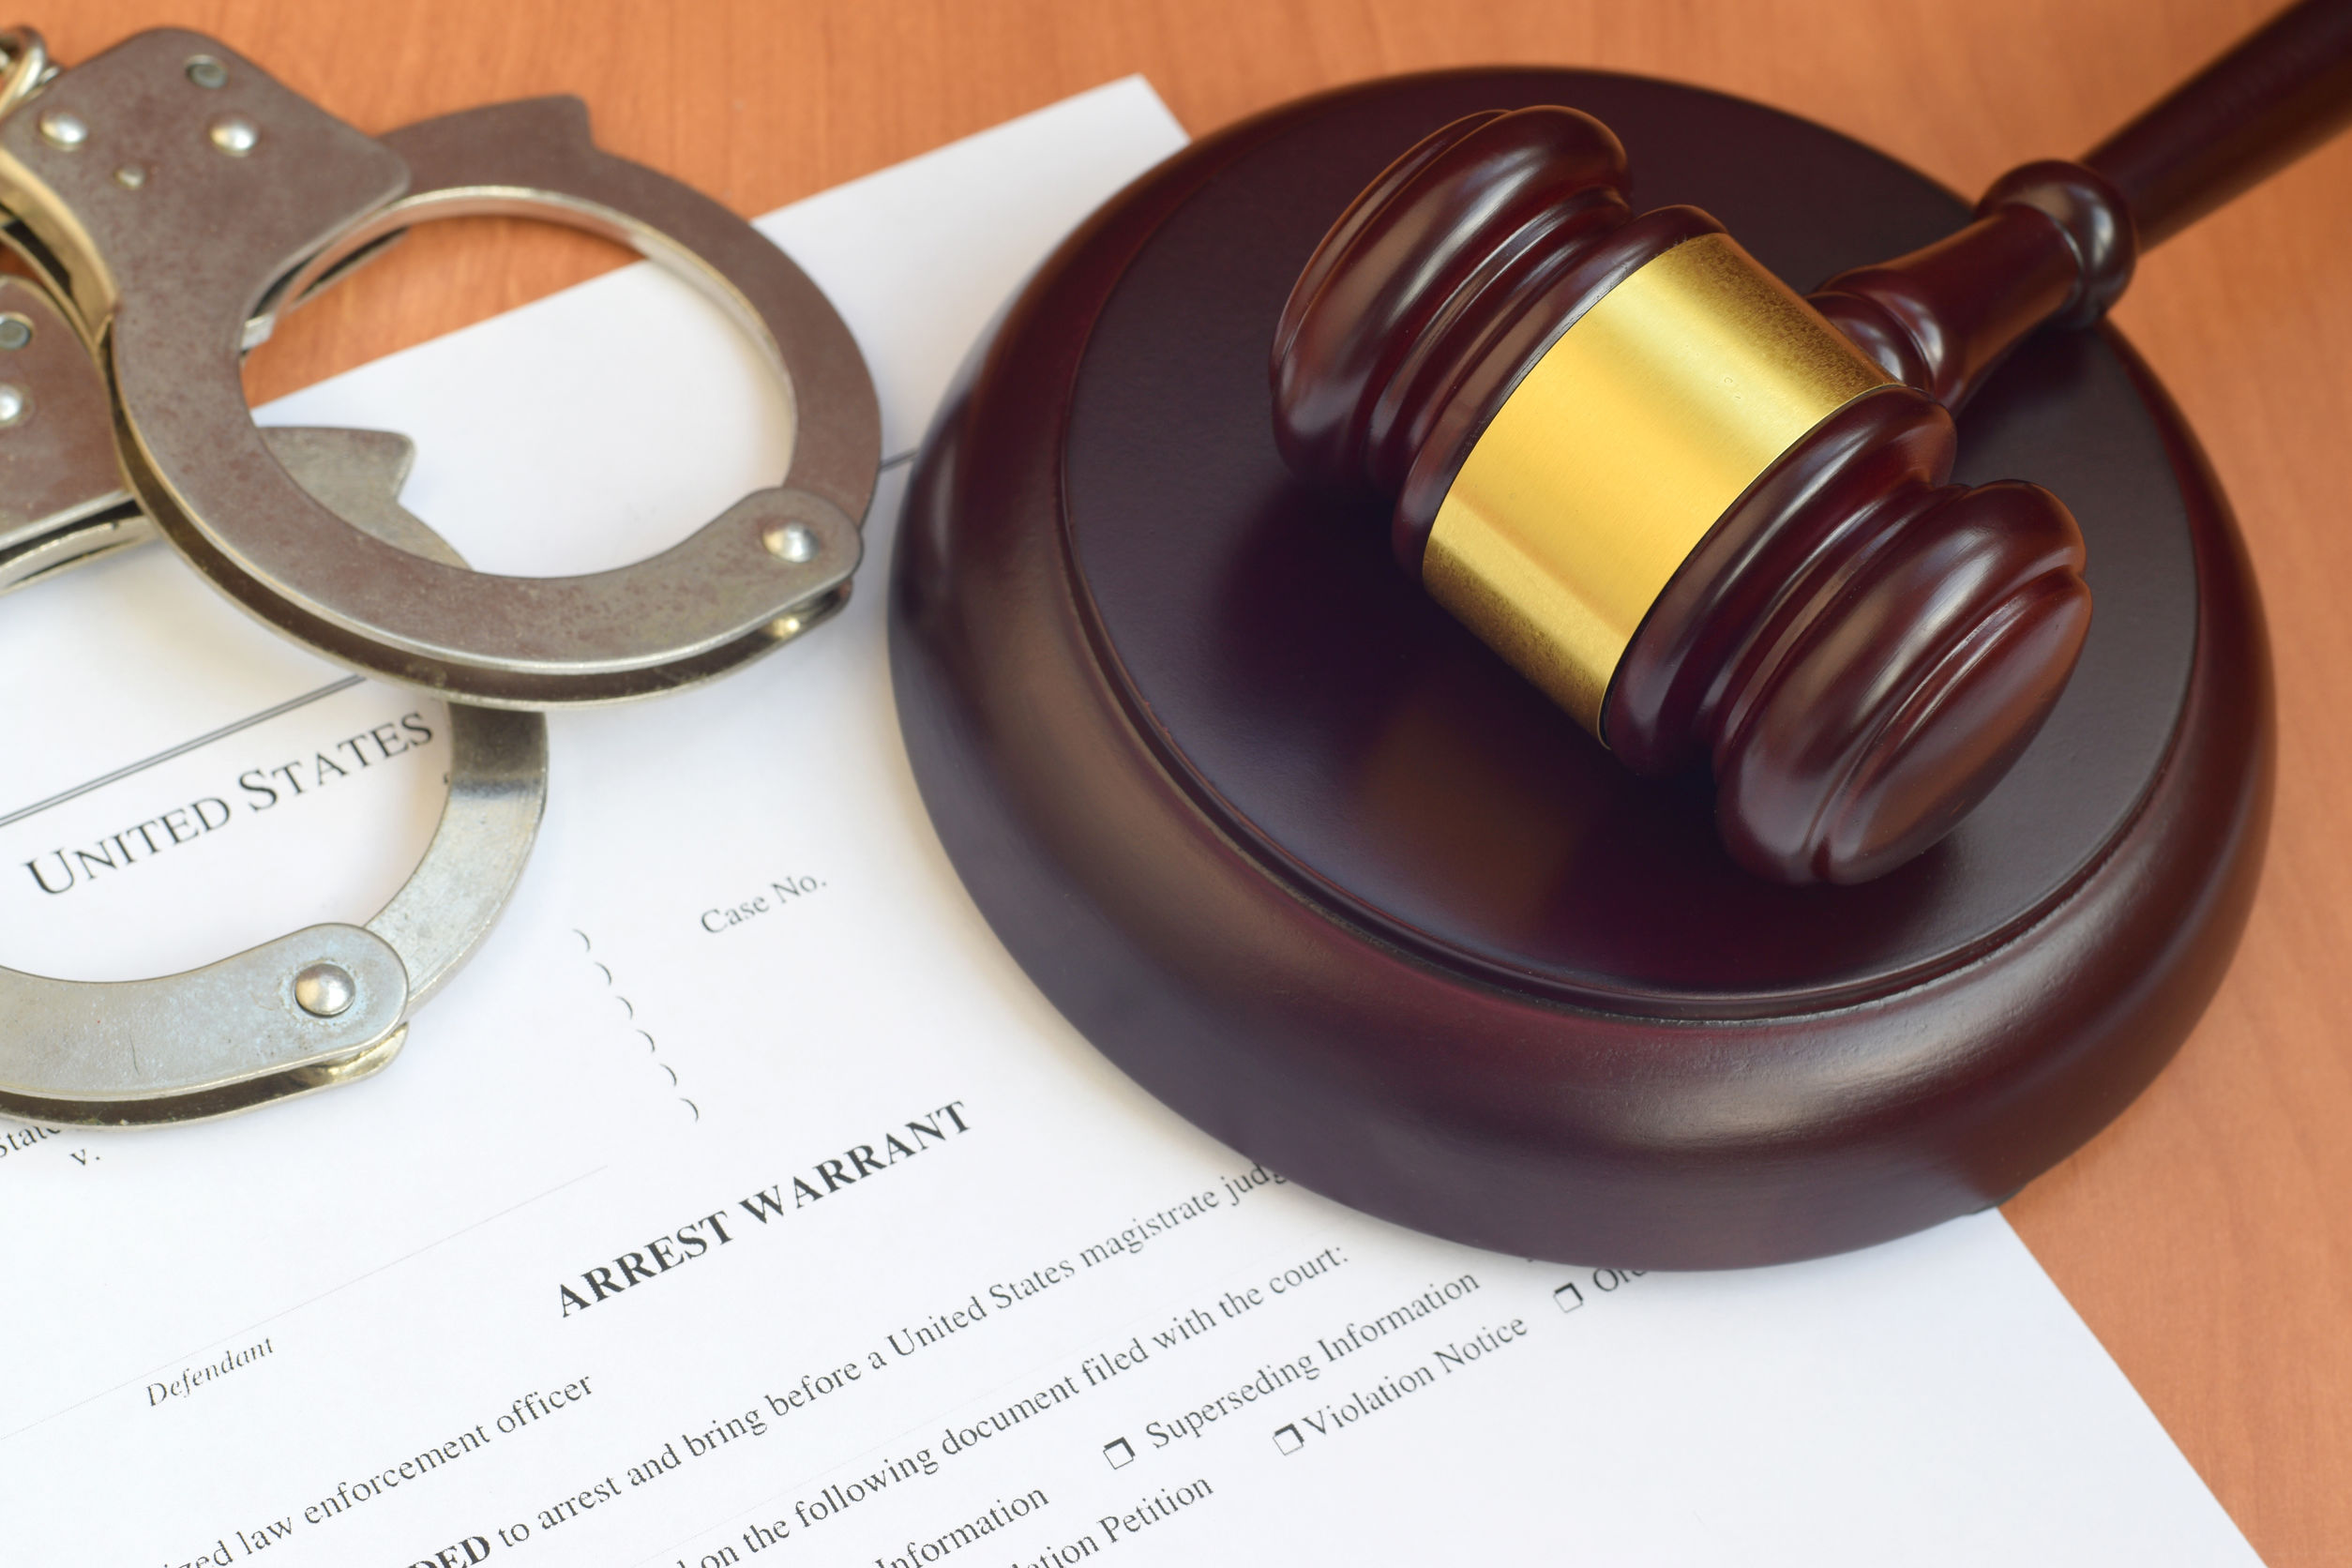 Is a Search Warrant and an Arrest Warrant the Same in California?